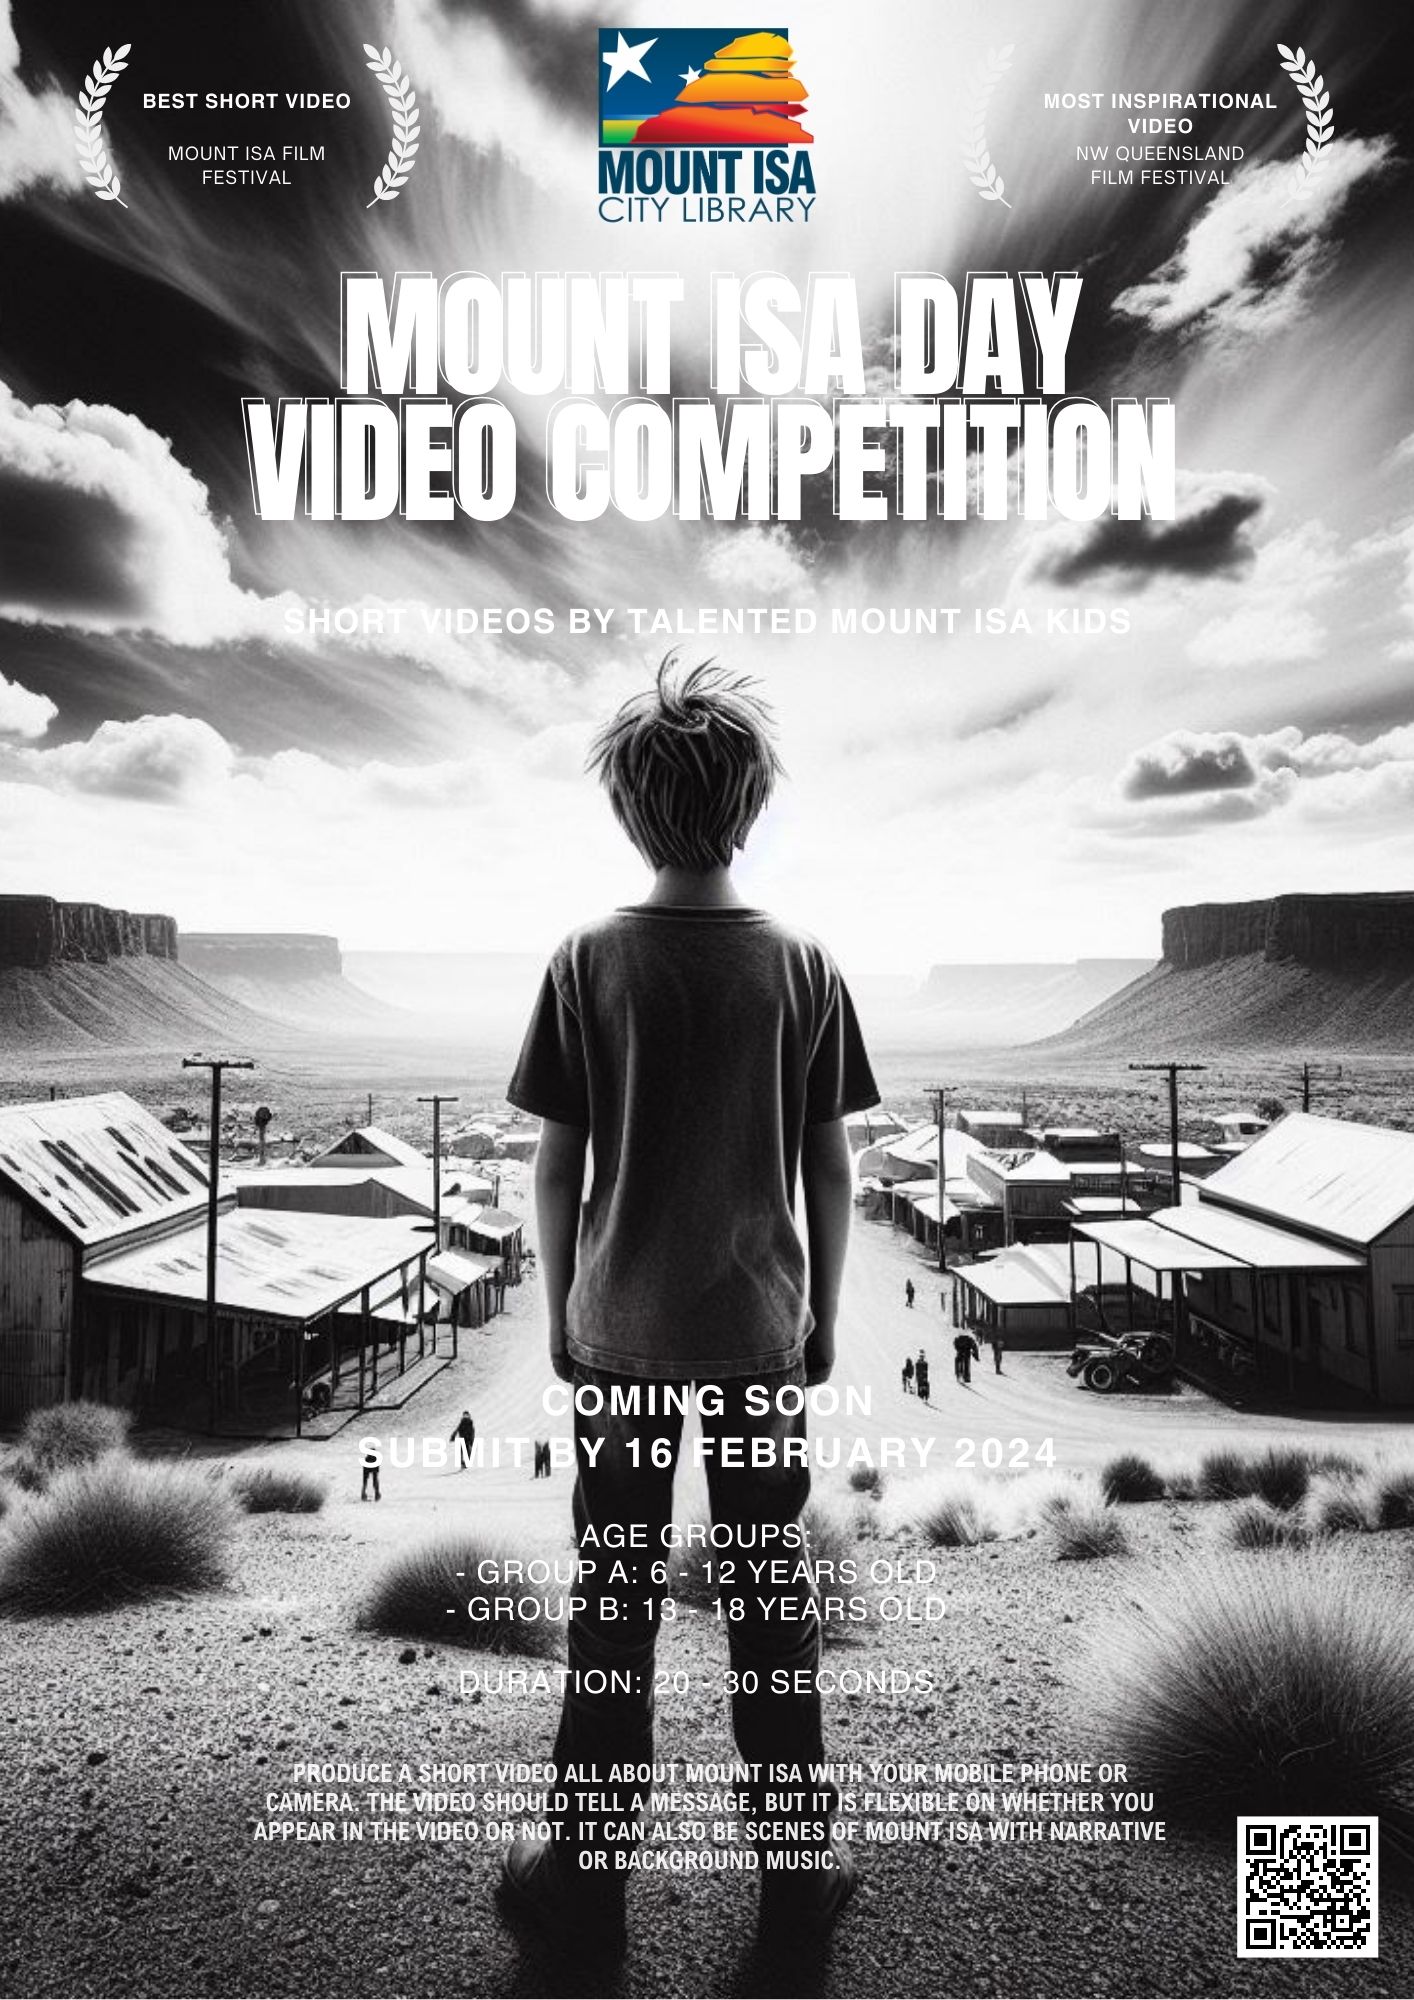 Mount isa day video competition